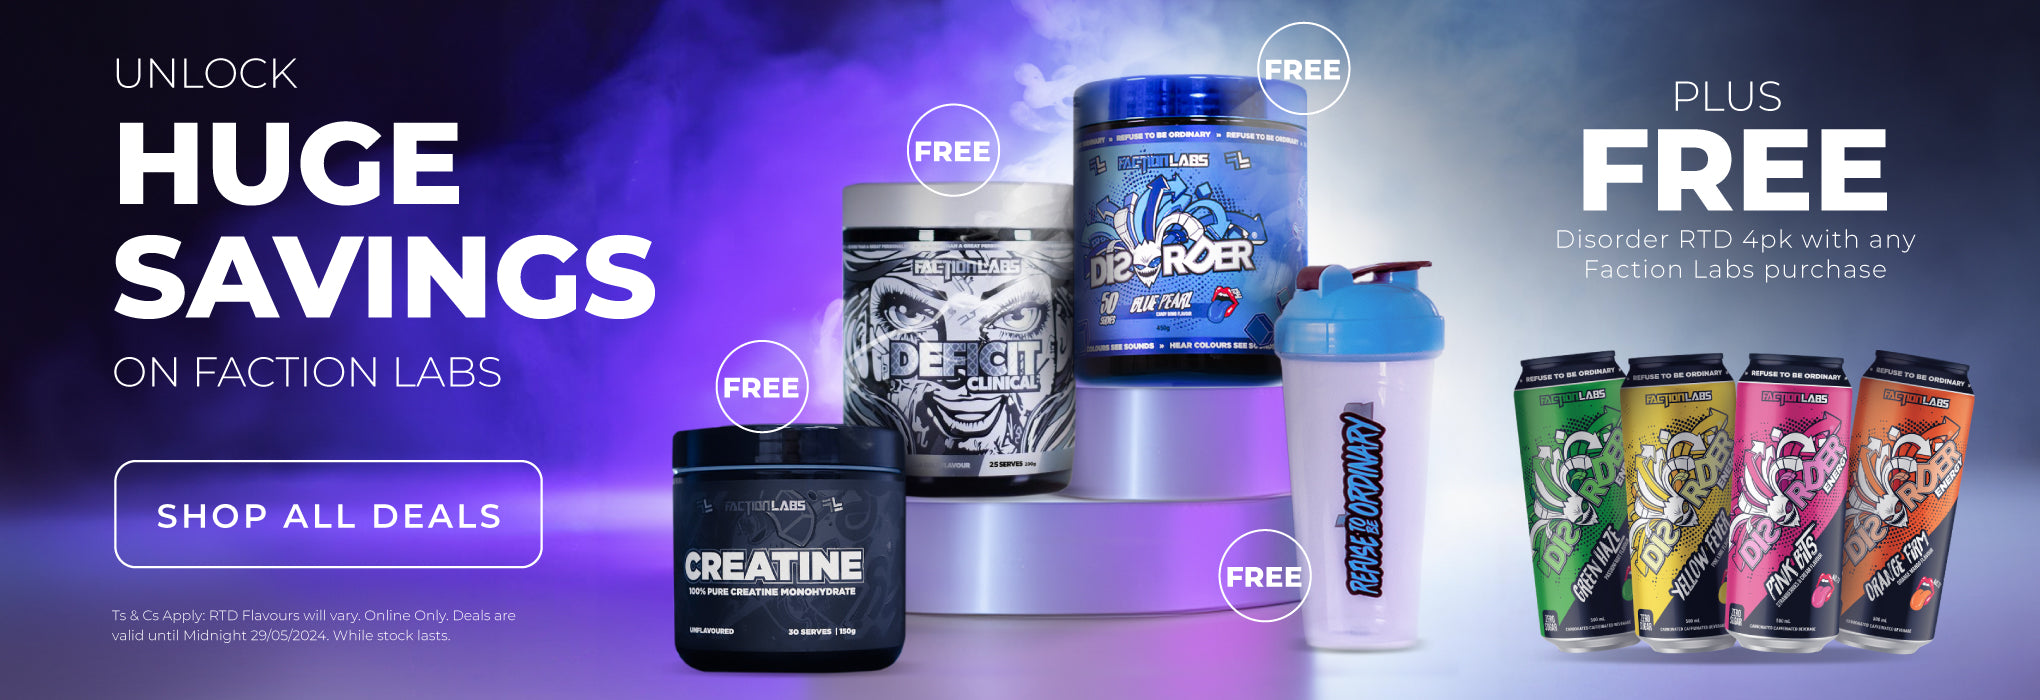 Unlock HUGE Savings on Faction Labs + FREE Disorder RTD 4 pack with any Faction Labs purchase